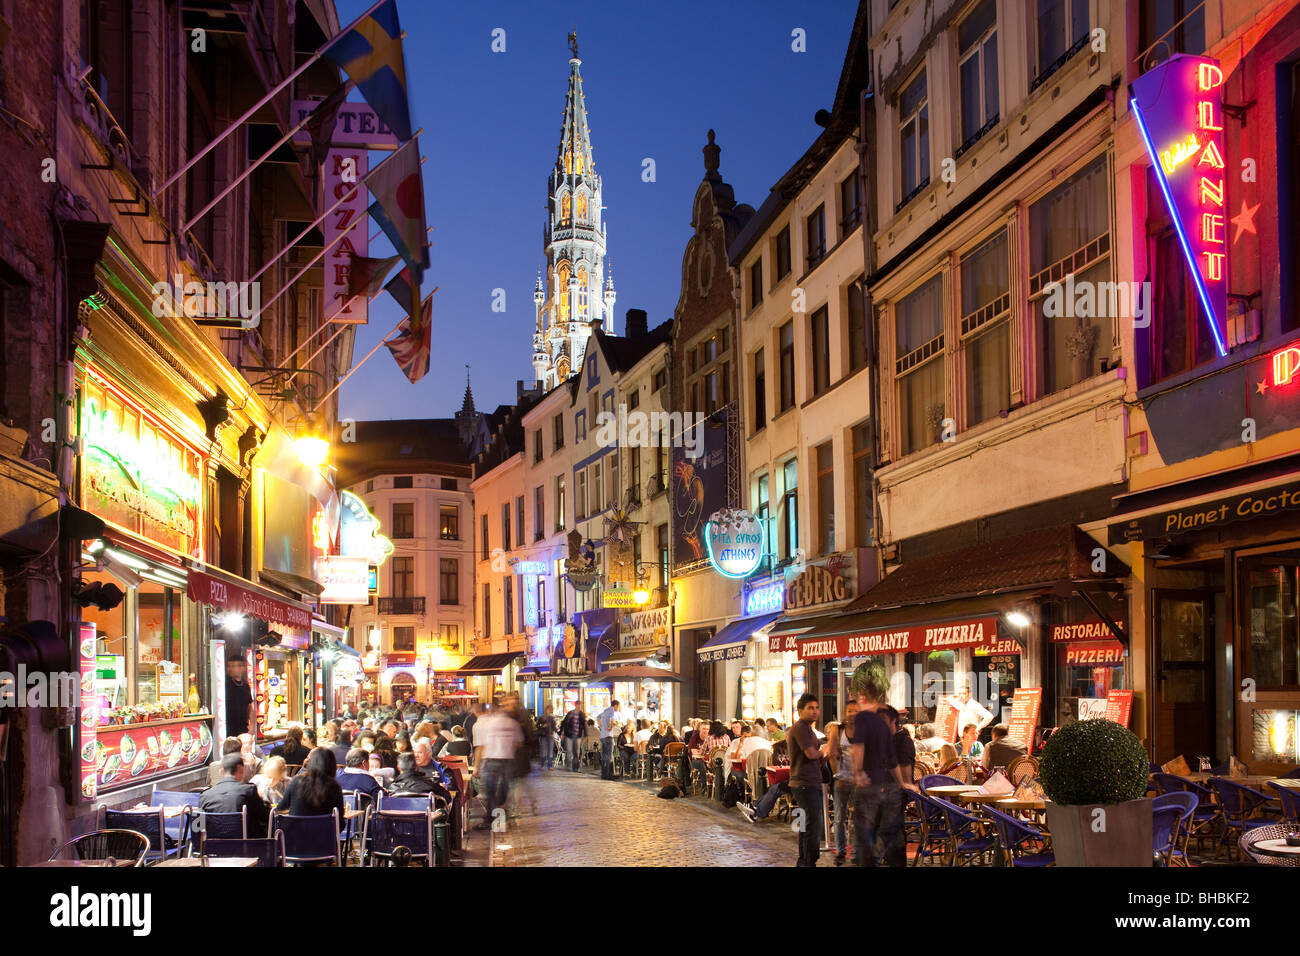 Pavement Cafes viewed at dusk, Brussels Belgium Stock Photo